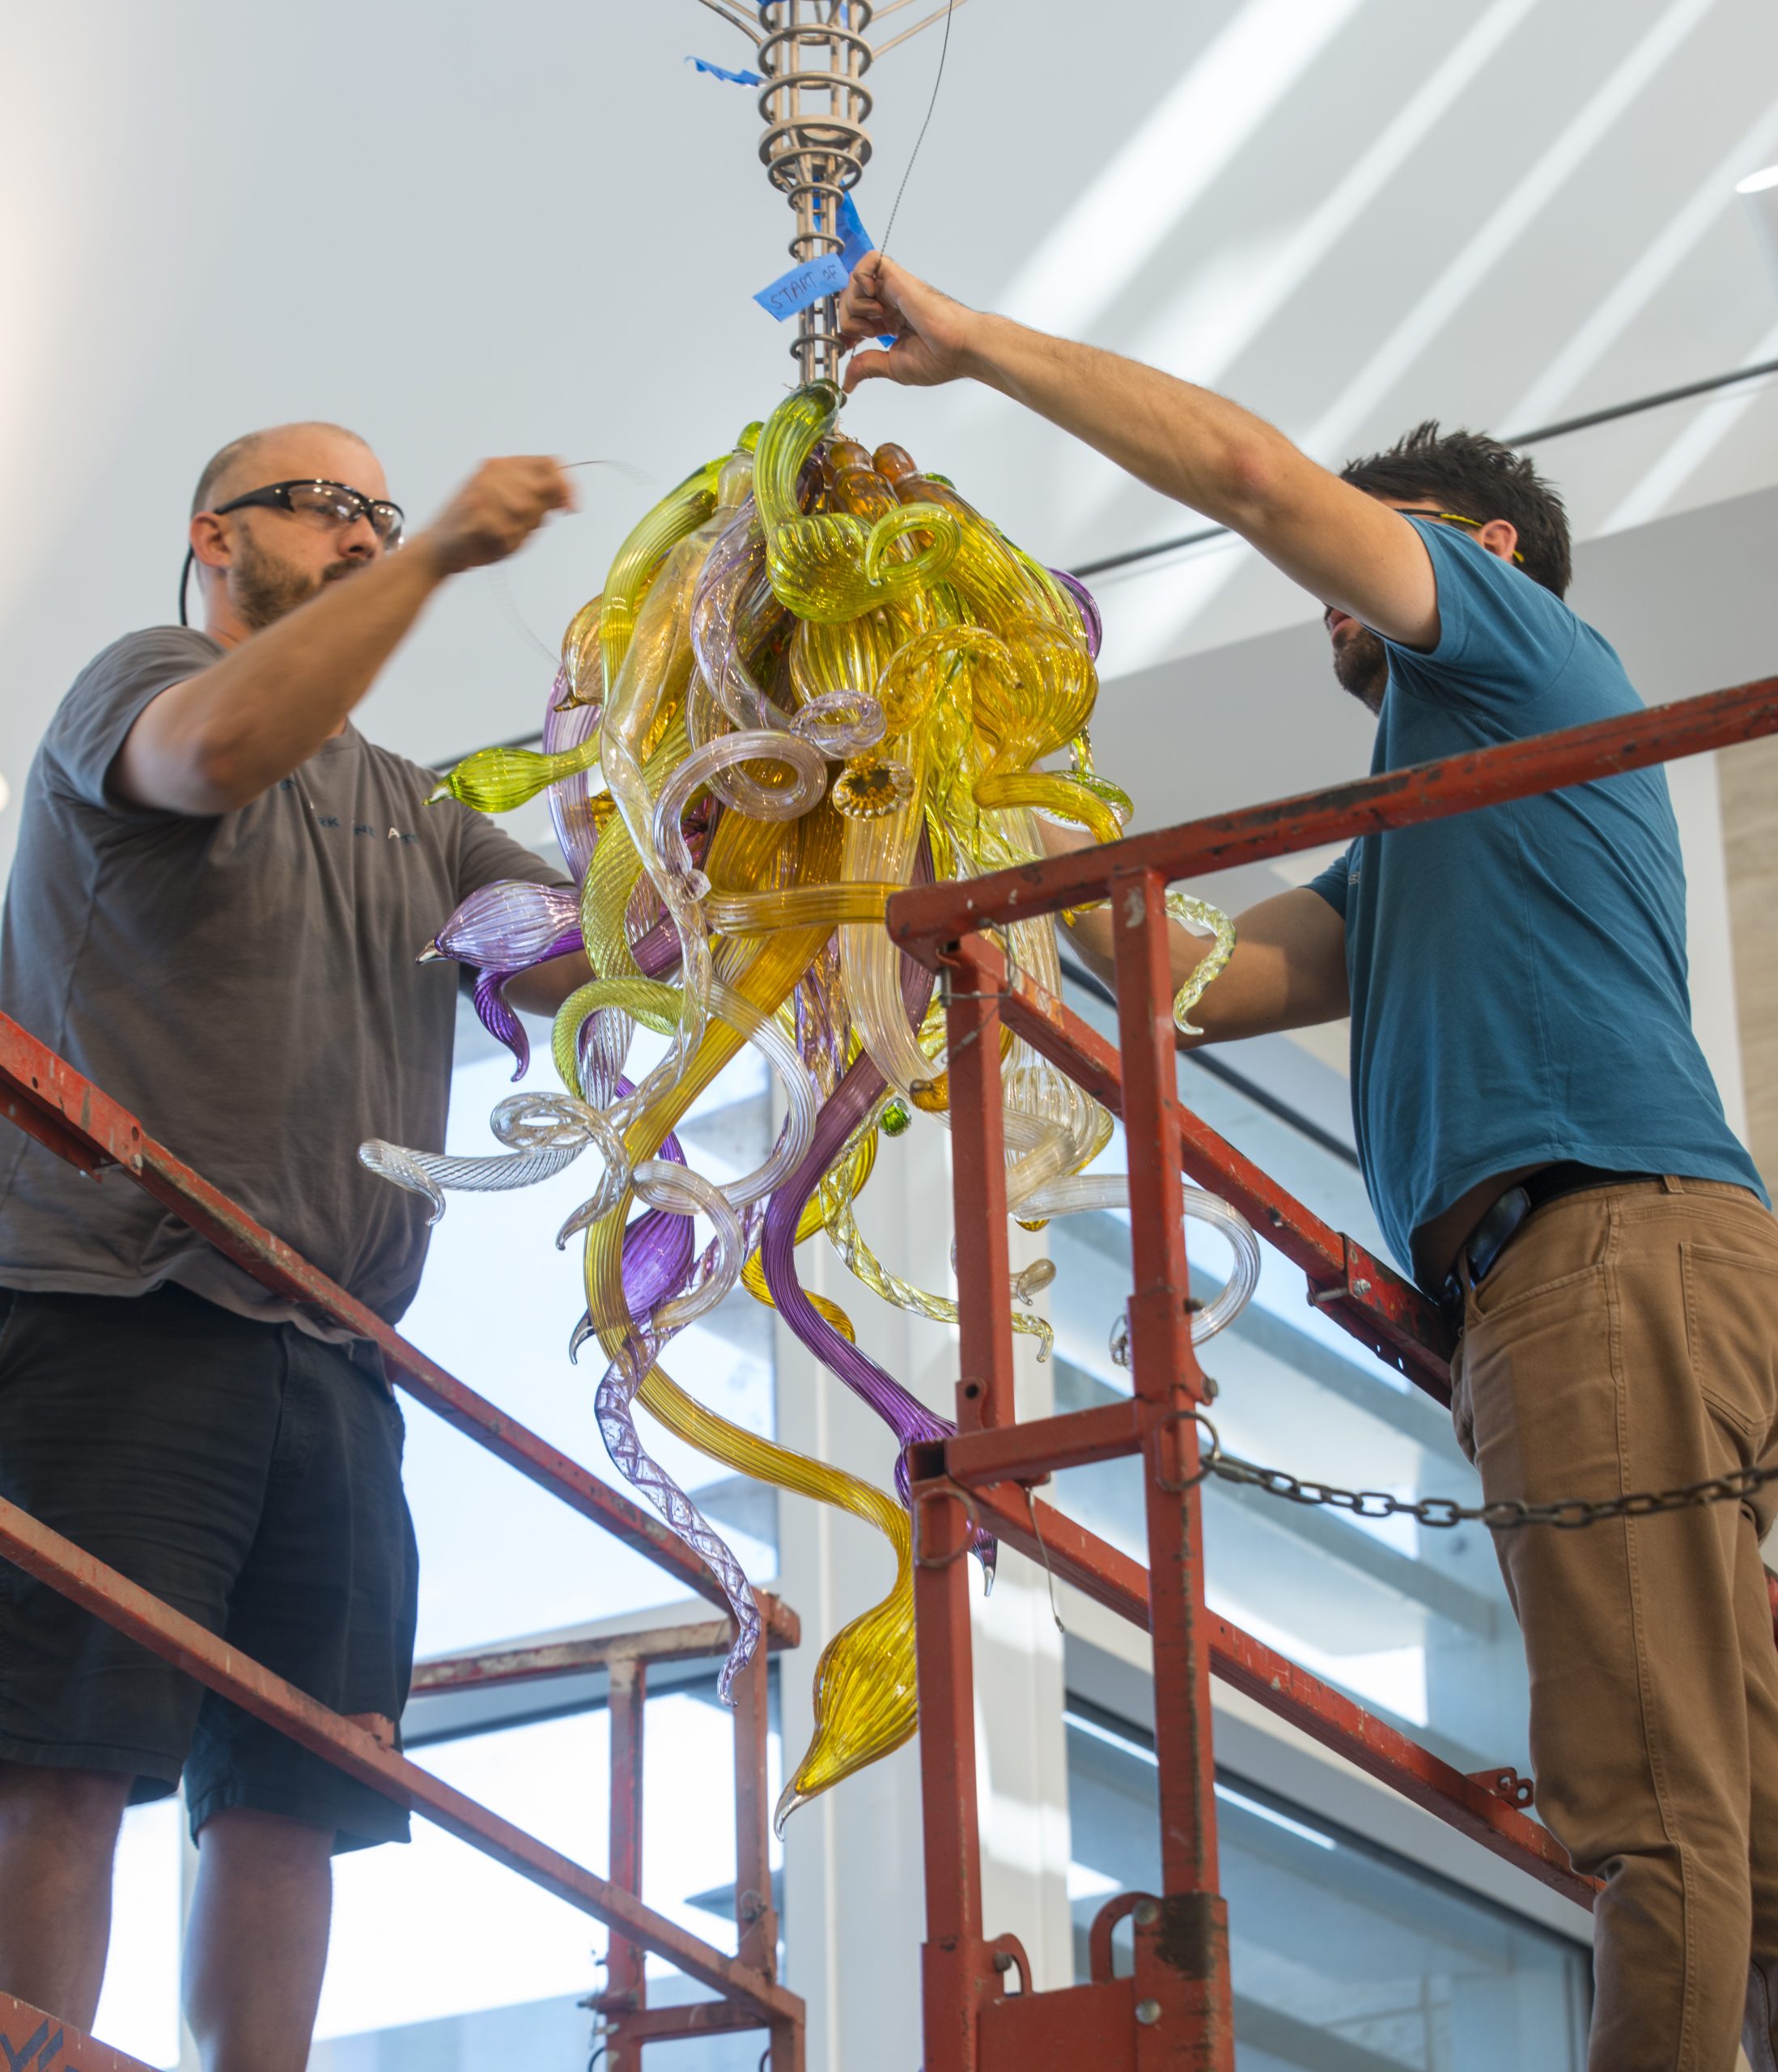 Two men disassemble an intricate glass sculpture.